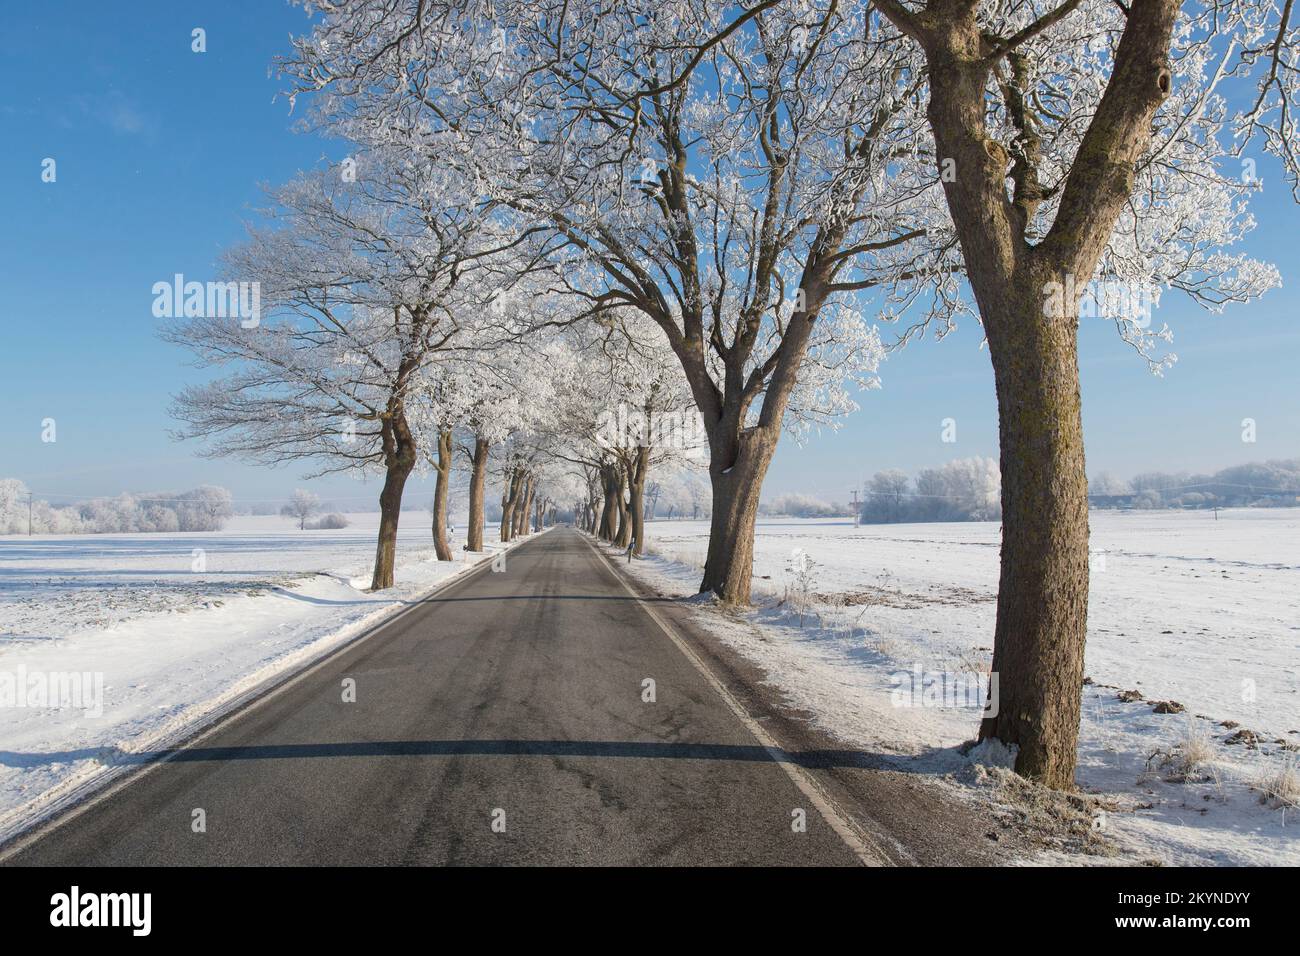 Small-leaved lime / little-leaf linden (Tilia cordata) trees bordering country road on snow covered countryside in winter, Schleswig-Holstein, Germany Stock Photo